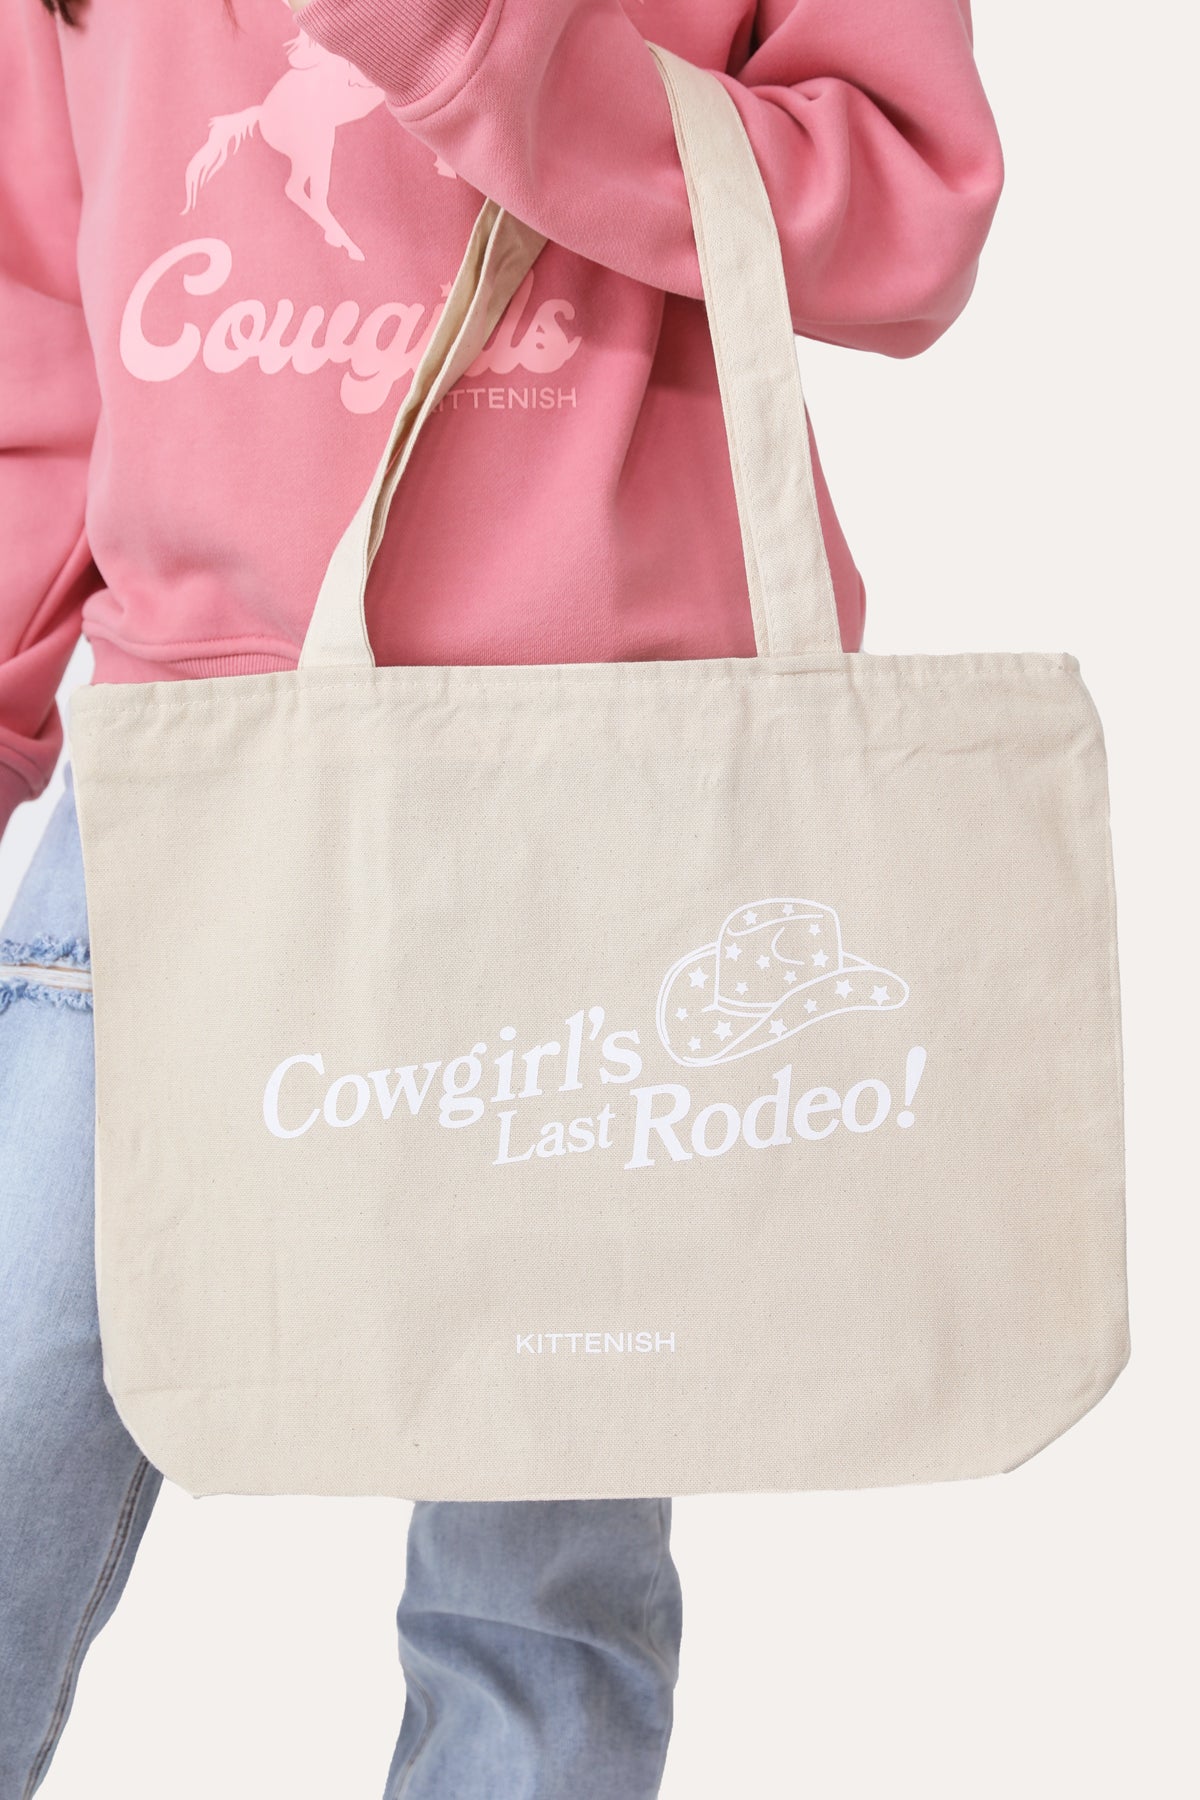 Leather Cowgirl Purse - Cattle Kate